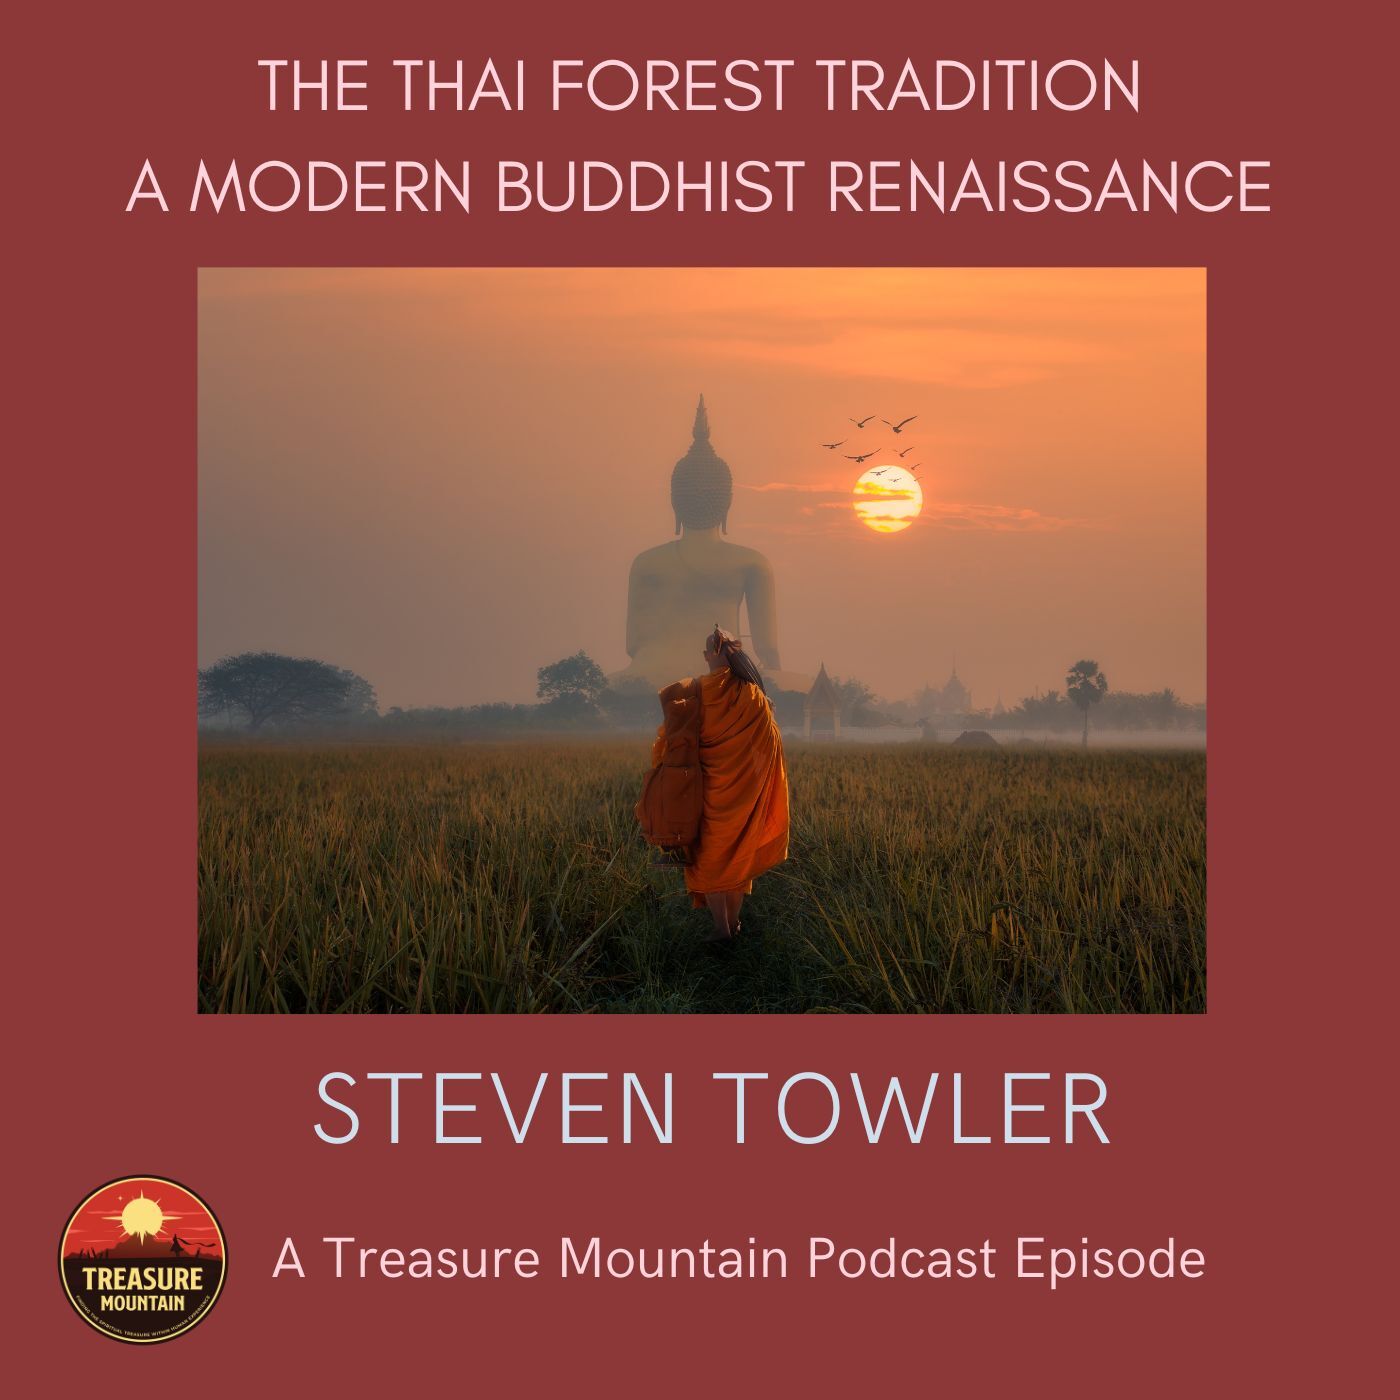 The Thai Forest Tradition with Steven Towler